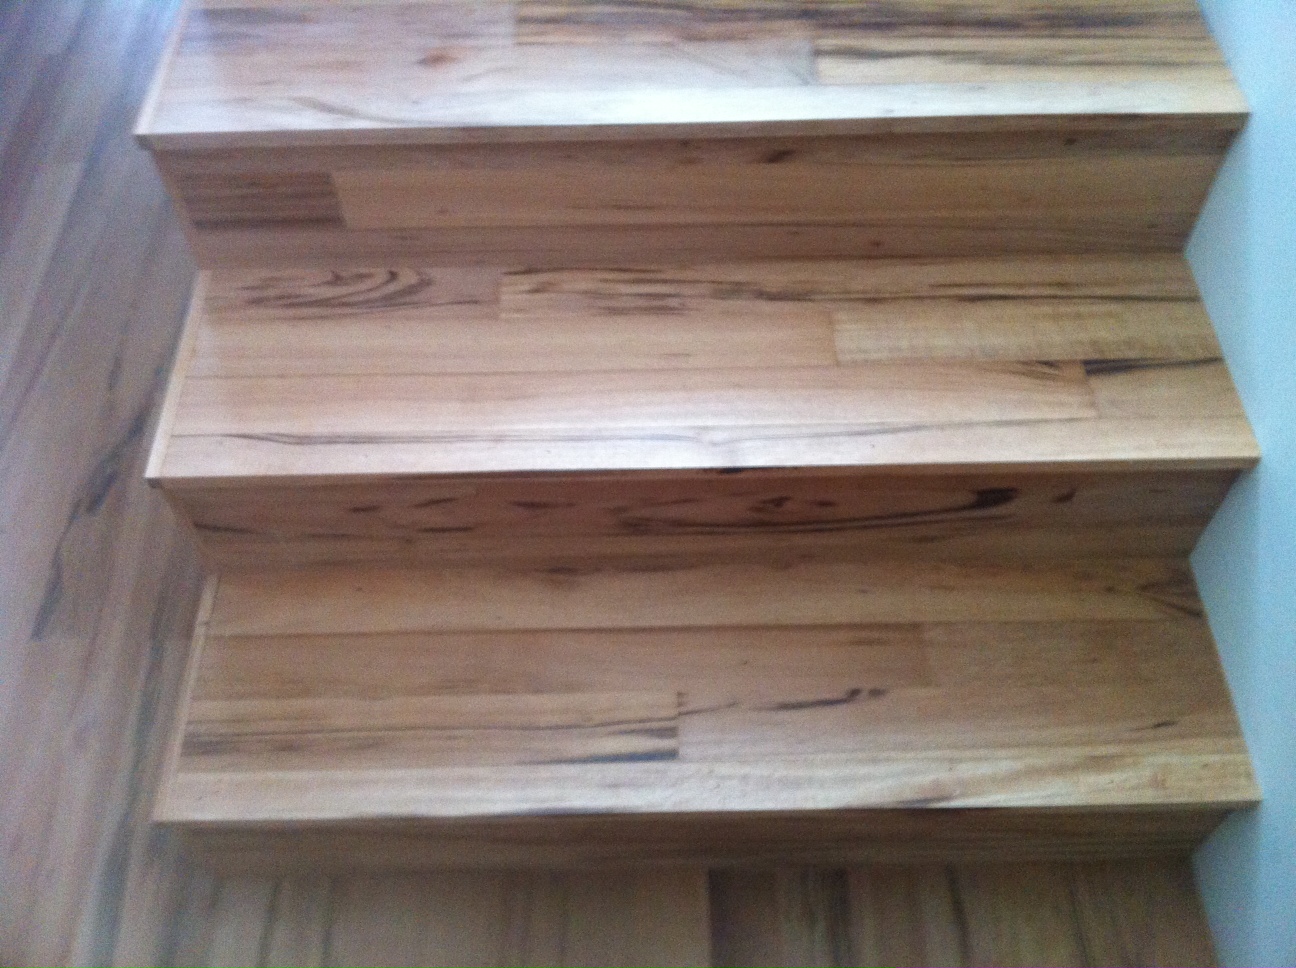 Stair Treads Using Flooring, How To Cover Stair Treads With Laminate Flooring